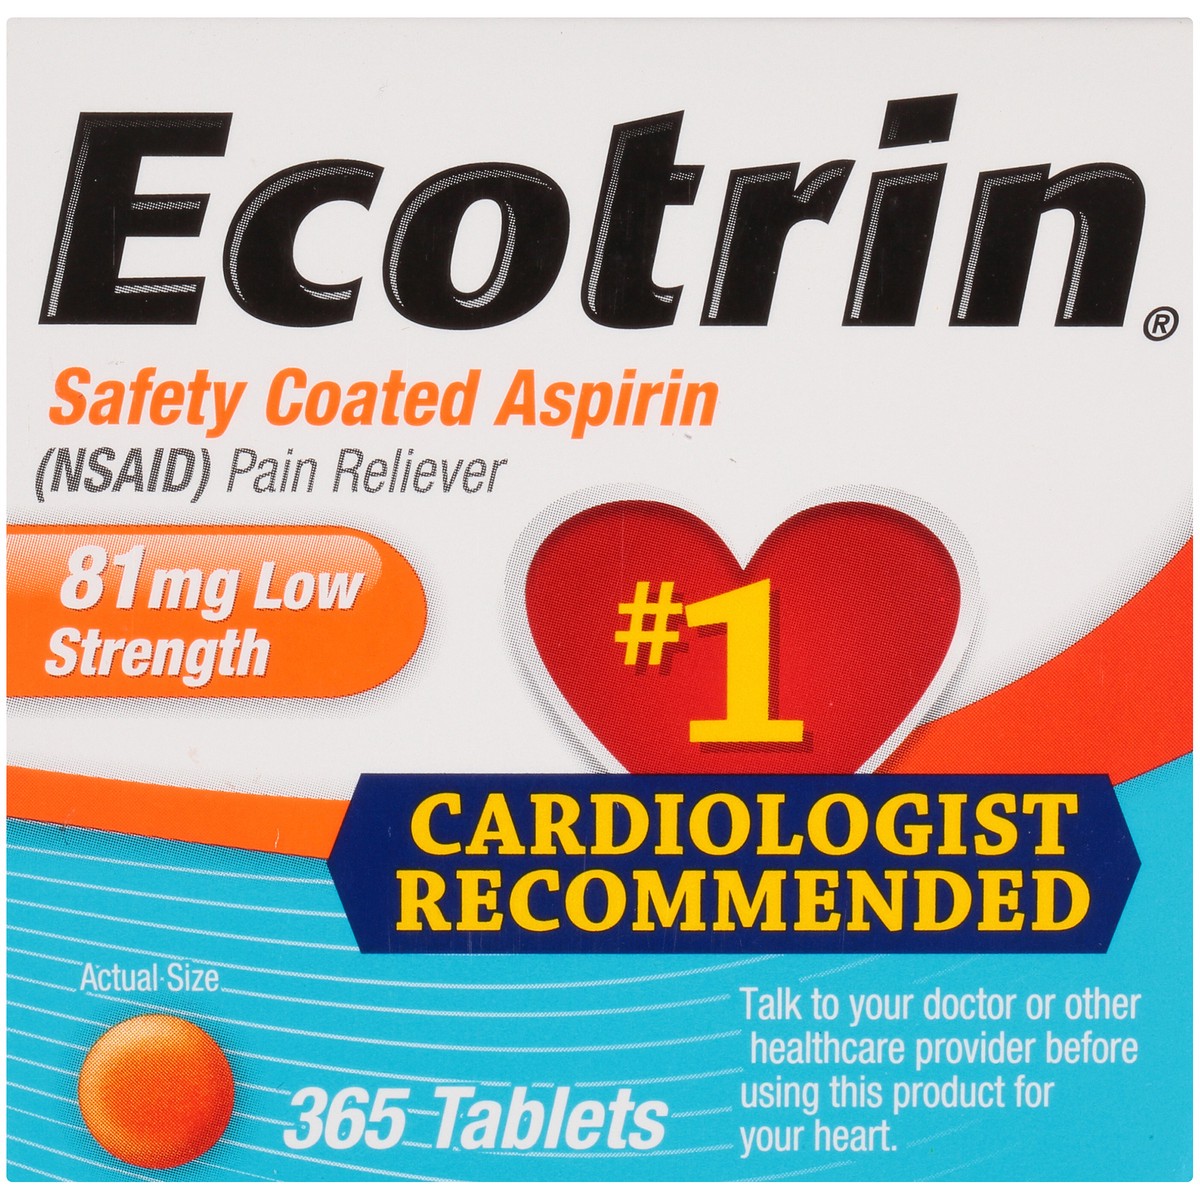 slide 9 of 10, Ecotrin Low Strength Safety Coated Aspirin, NSAID, 81mg, 365 Tablets, 365 pk